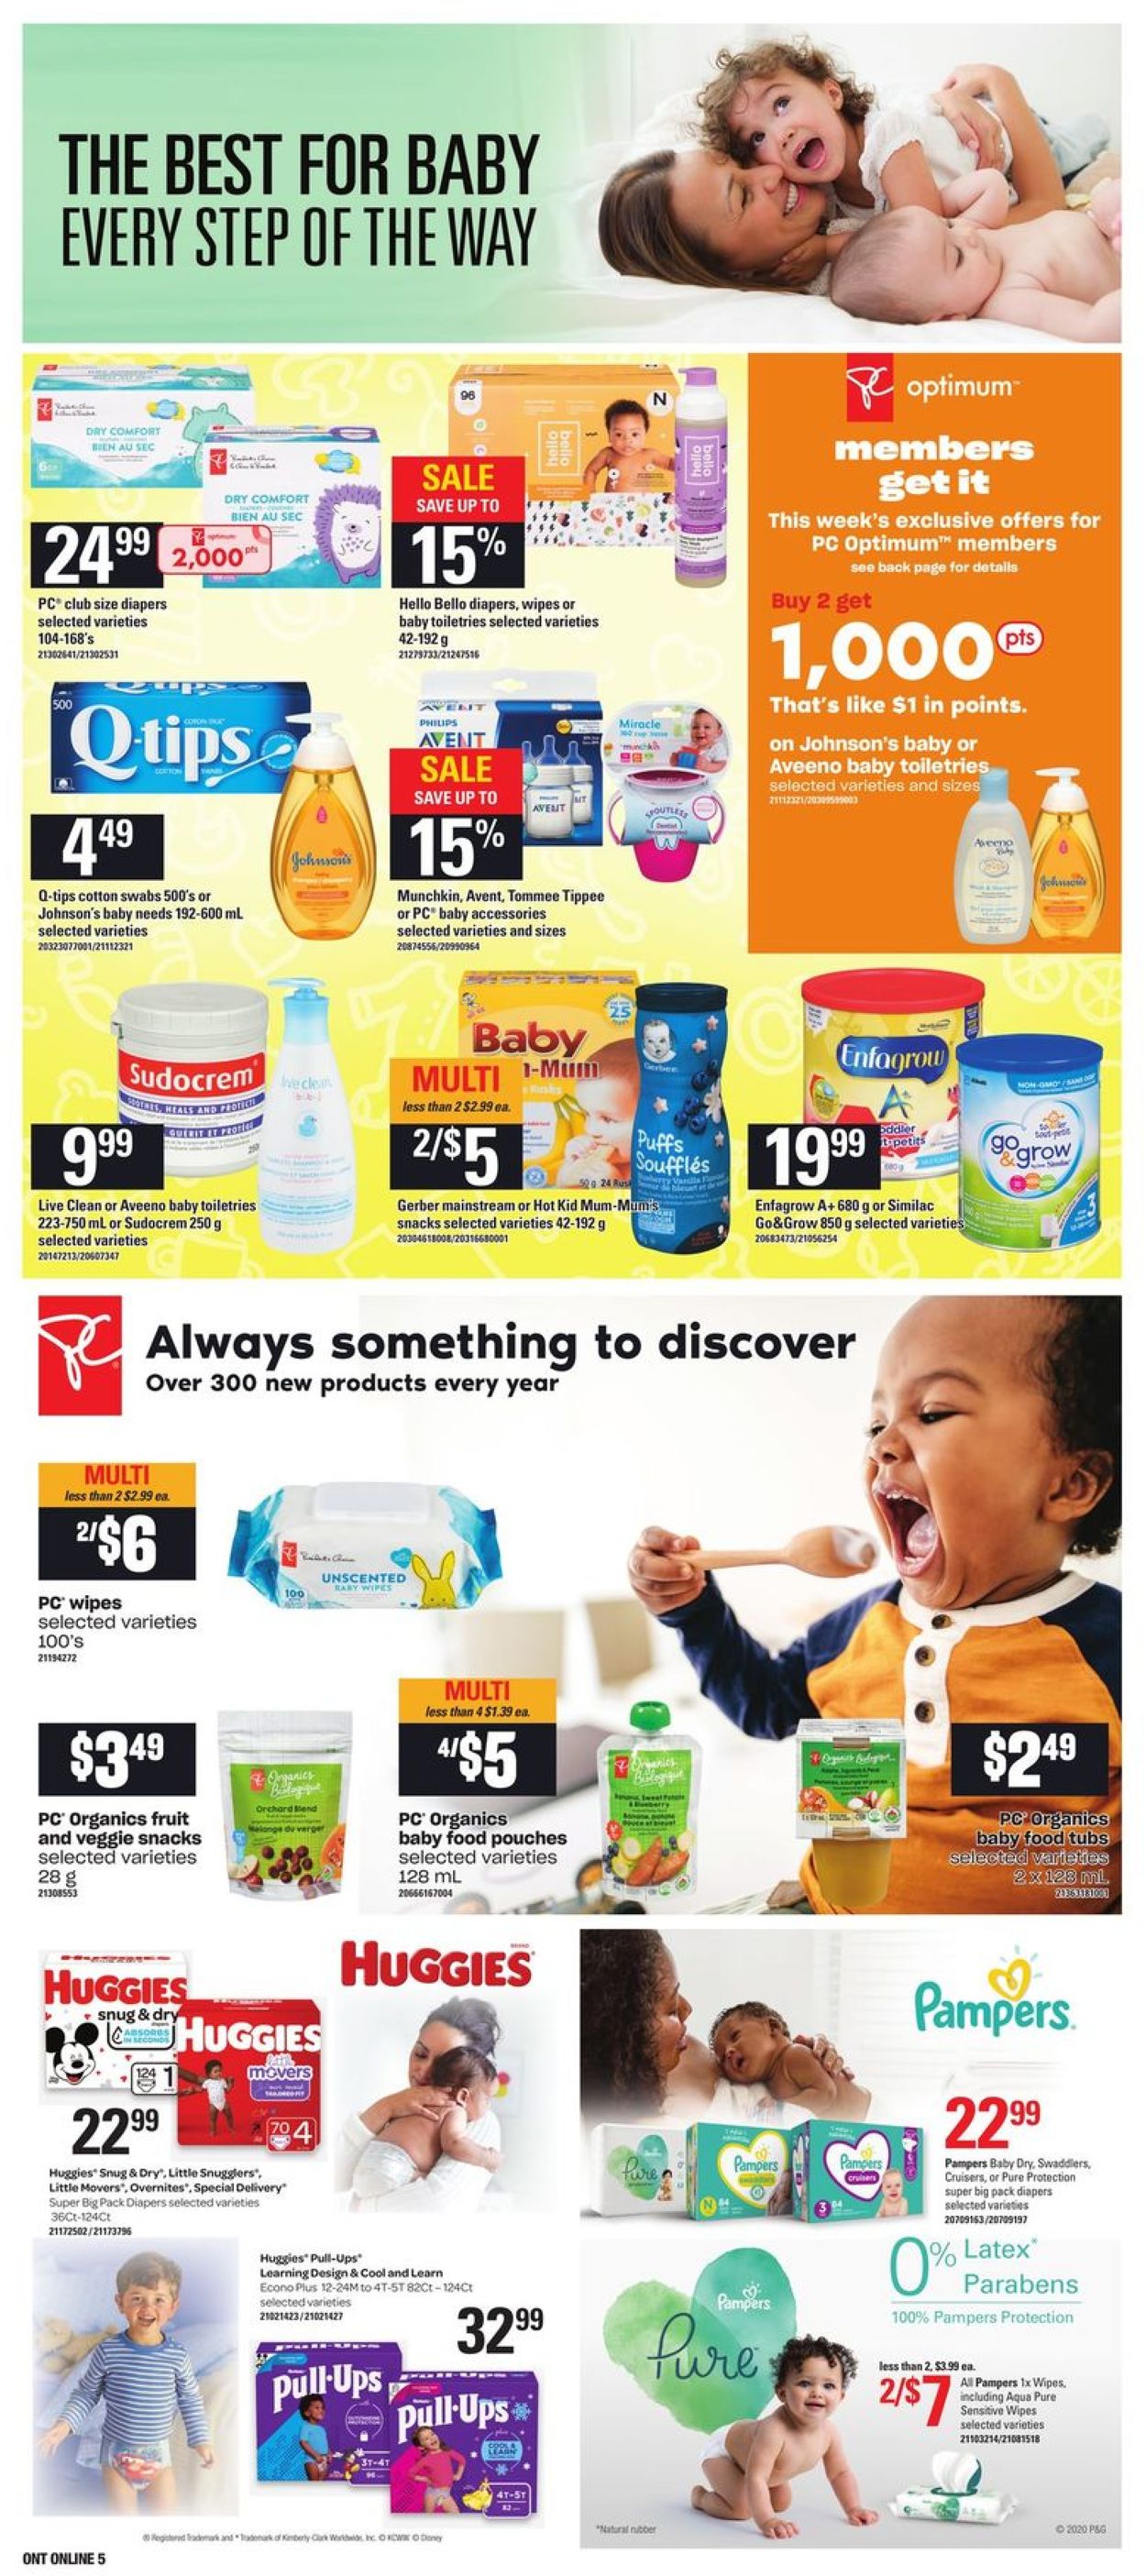 Zehrs Flyer from 04/08/2021